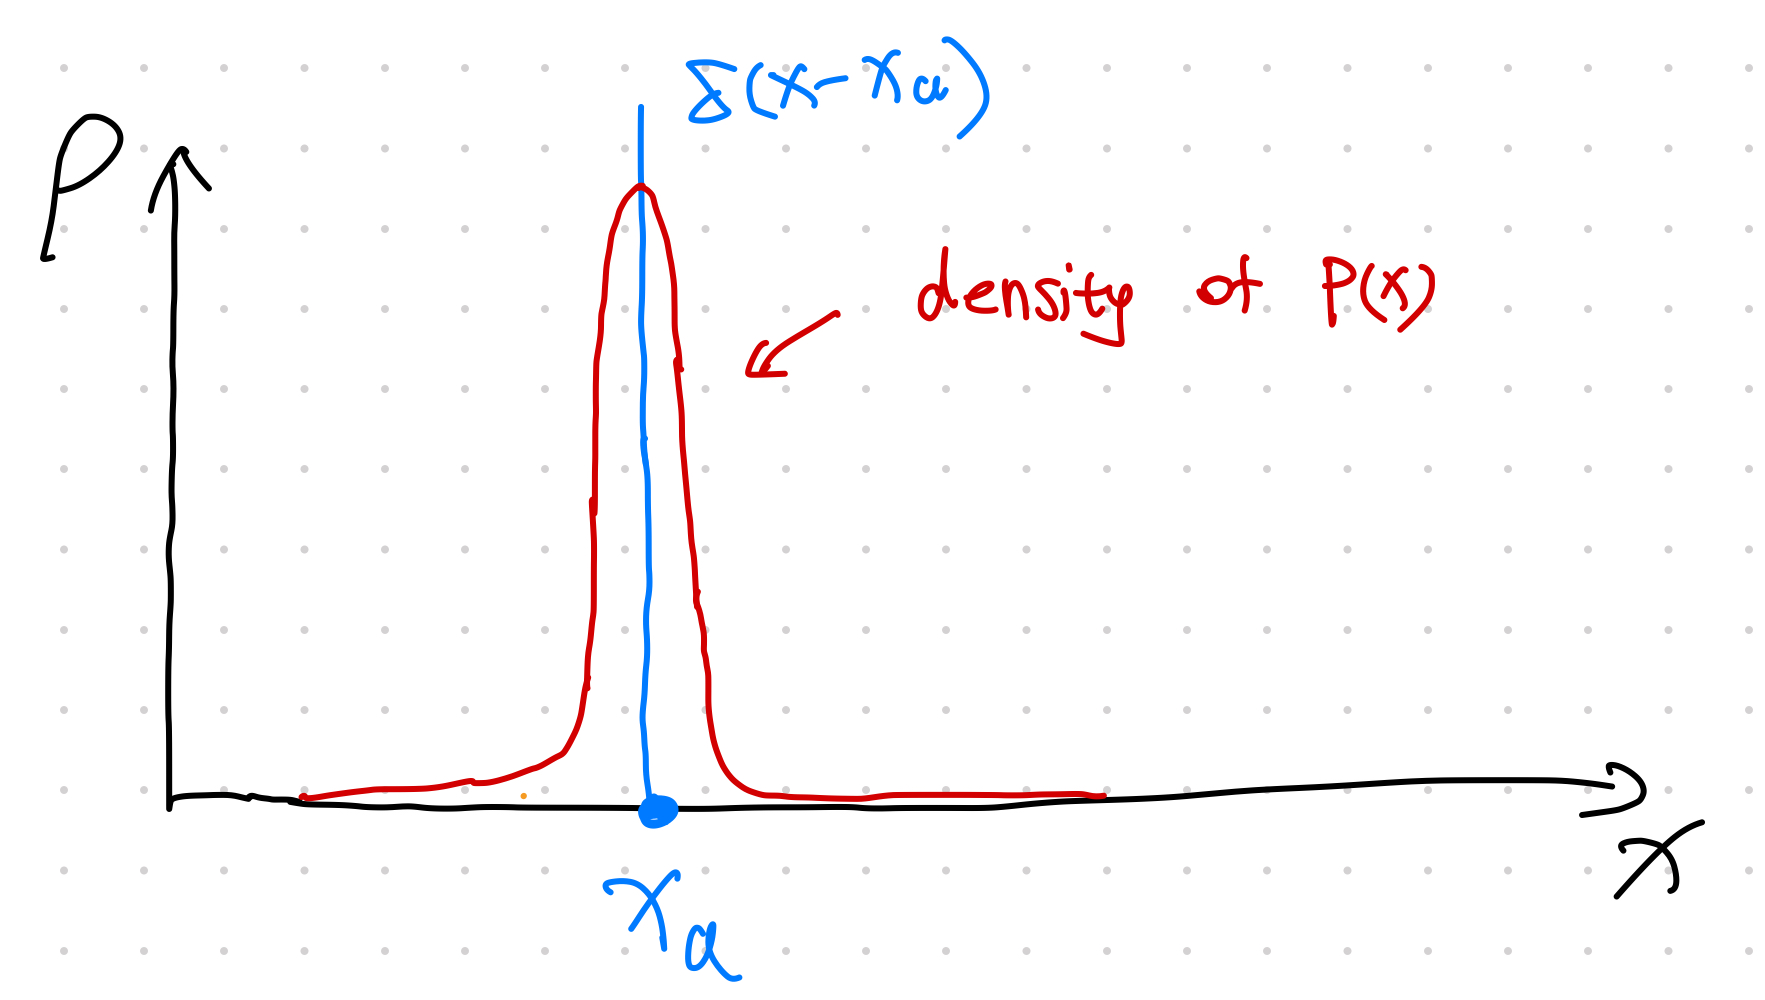 densities of $P(x)$ and $H(x-x_a)$